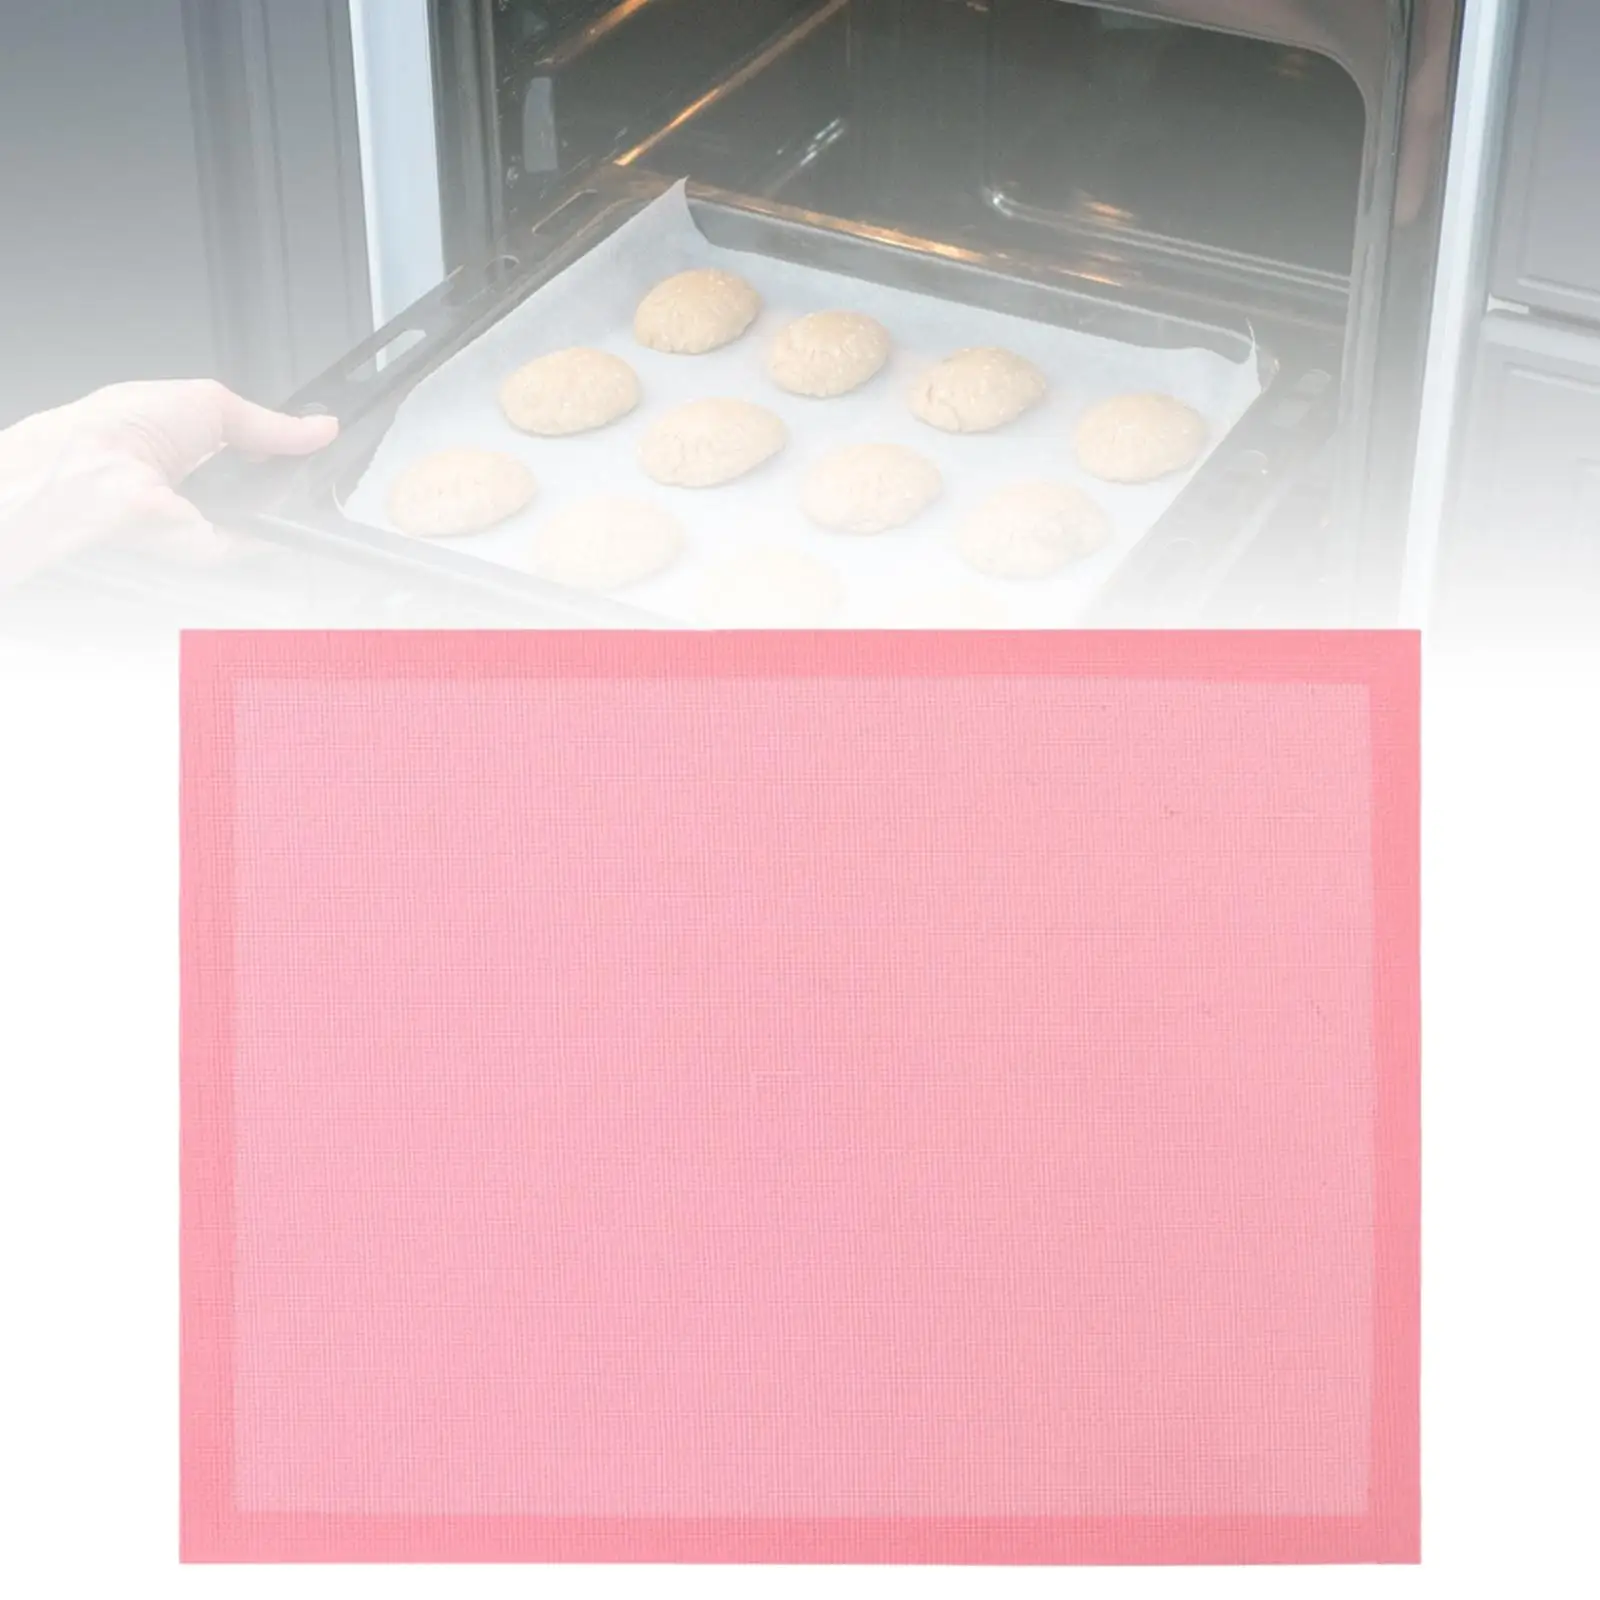 Silicone Baking Mat Bread Making Tools Nonstick Heat Resistant Bakeware Mat Cookie Mat Baking Sheet for Home Cafe Restaurant